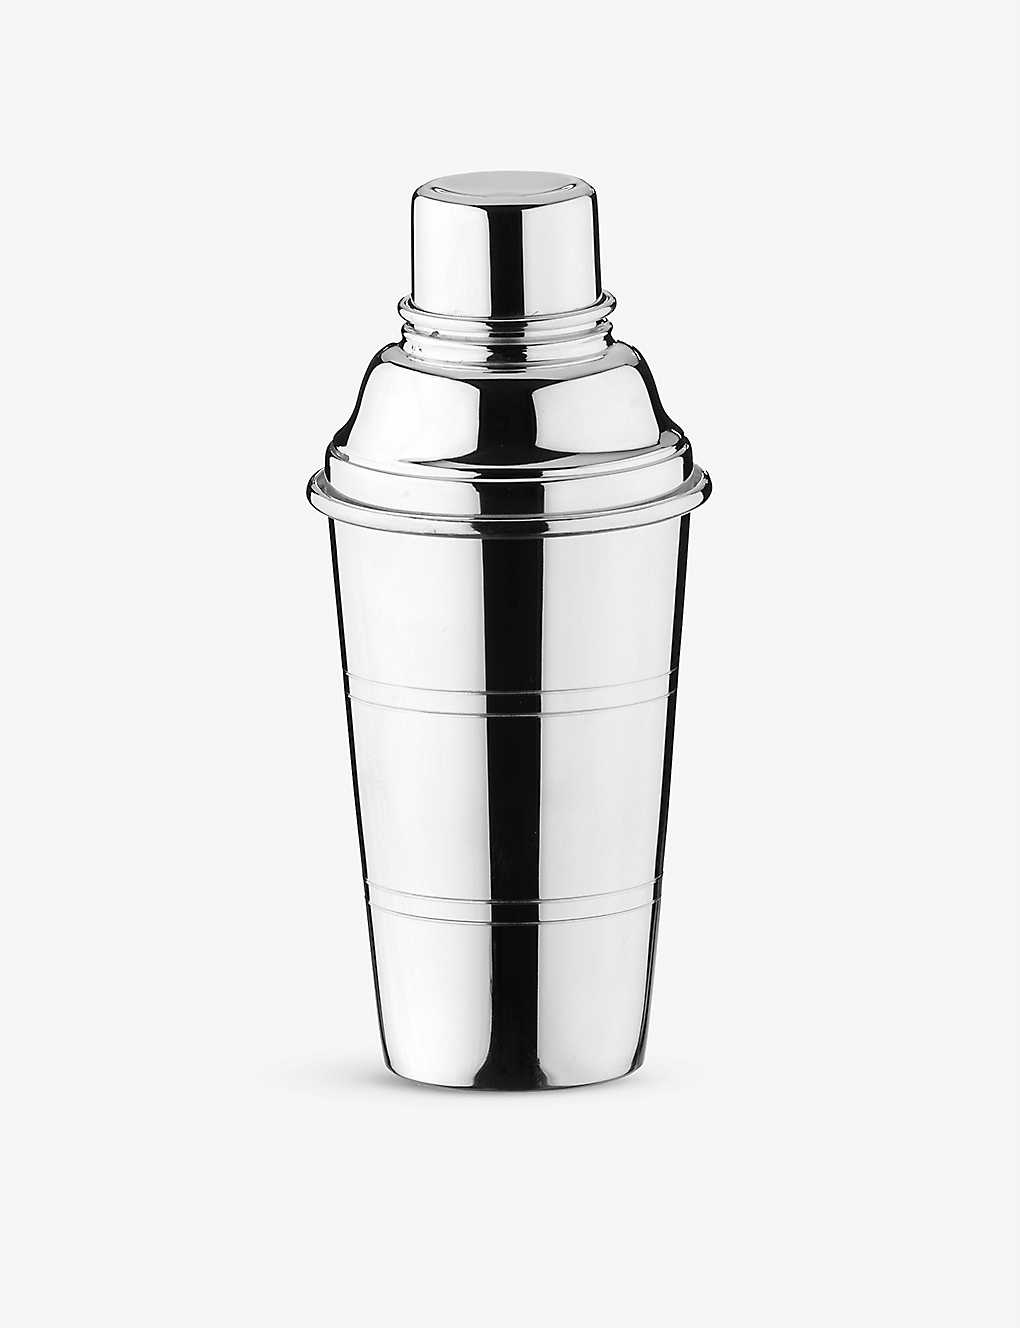 ARTHUR PRICE ⃁bL Rbp\ JNeVF[J[ 17.5cm Silver-plated copper cocktail shaker 17.5cm Silver Plated